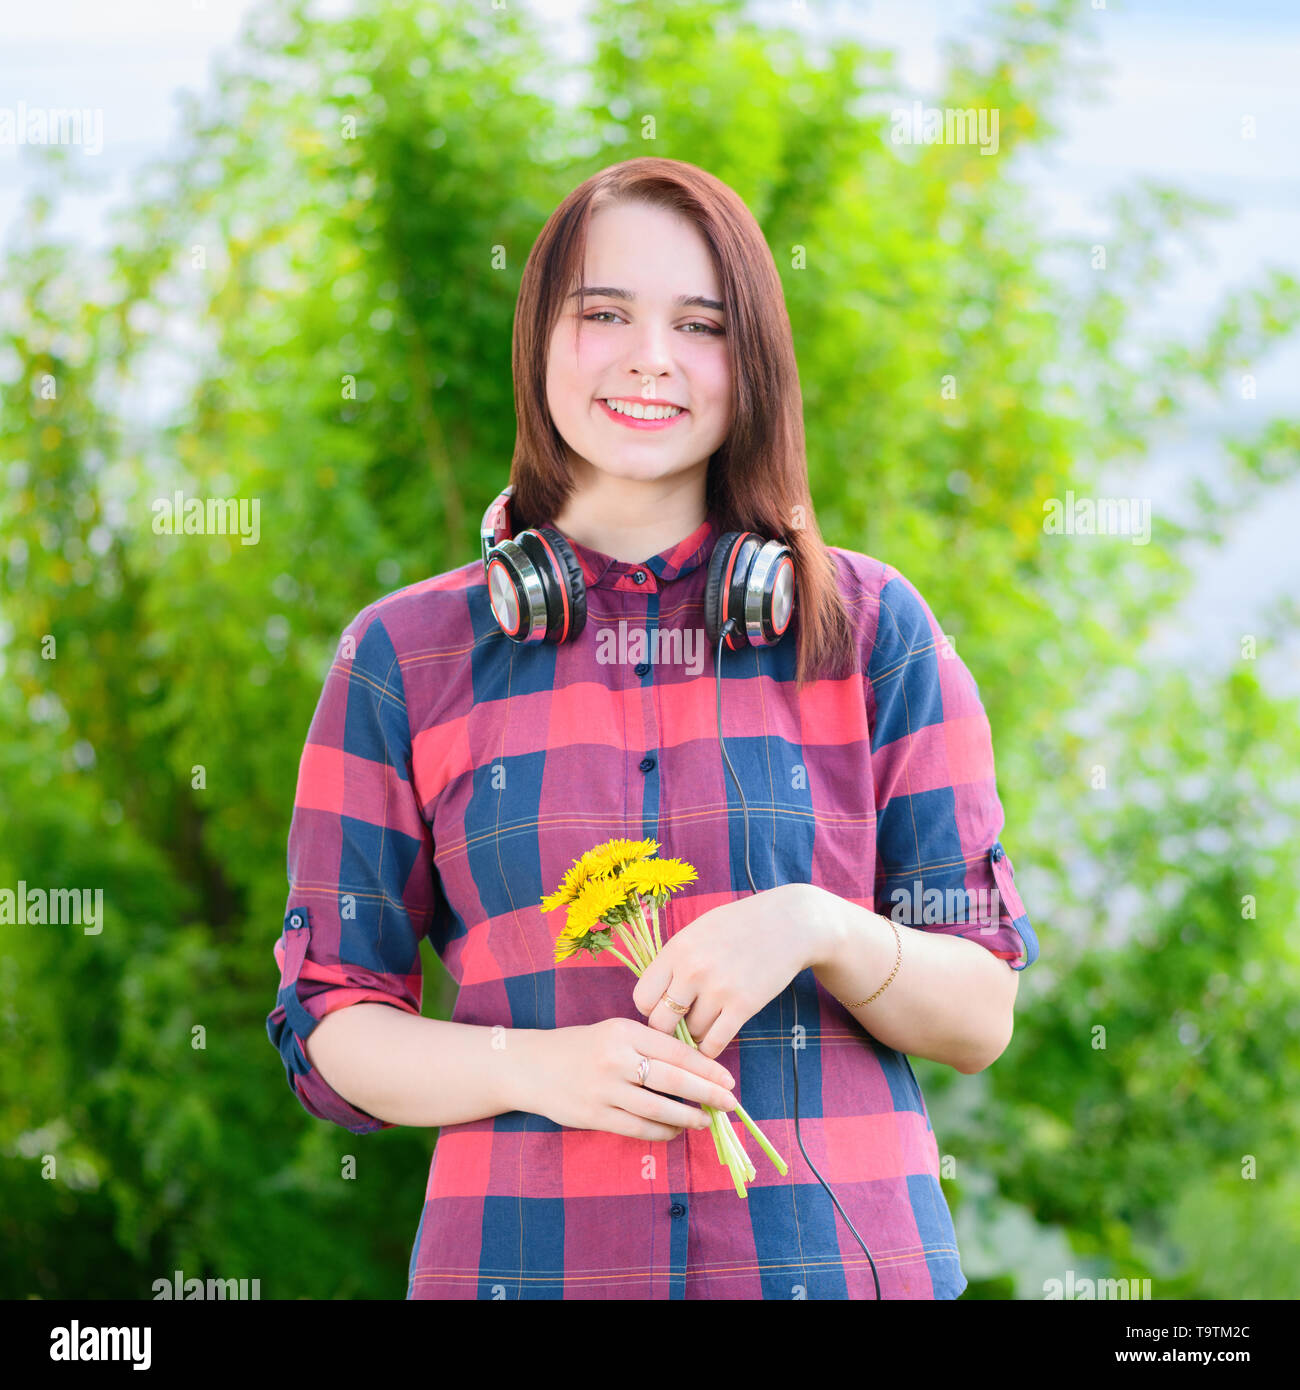 The smiling brunette woman is holding the bouquet of yellow flowers in her hand in a summer park. Stock Photo